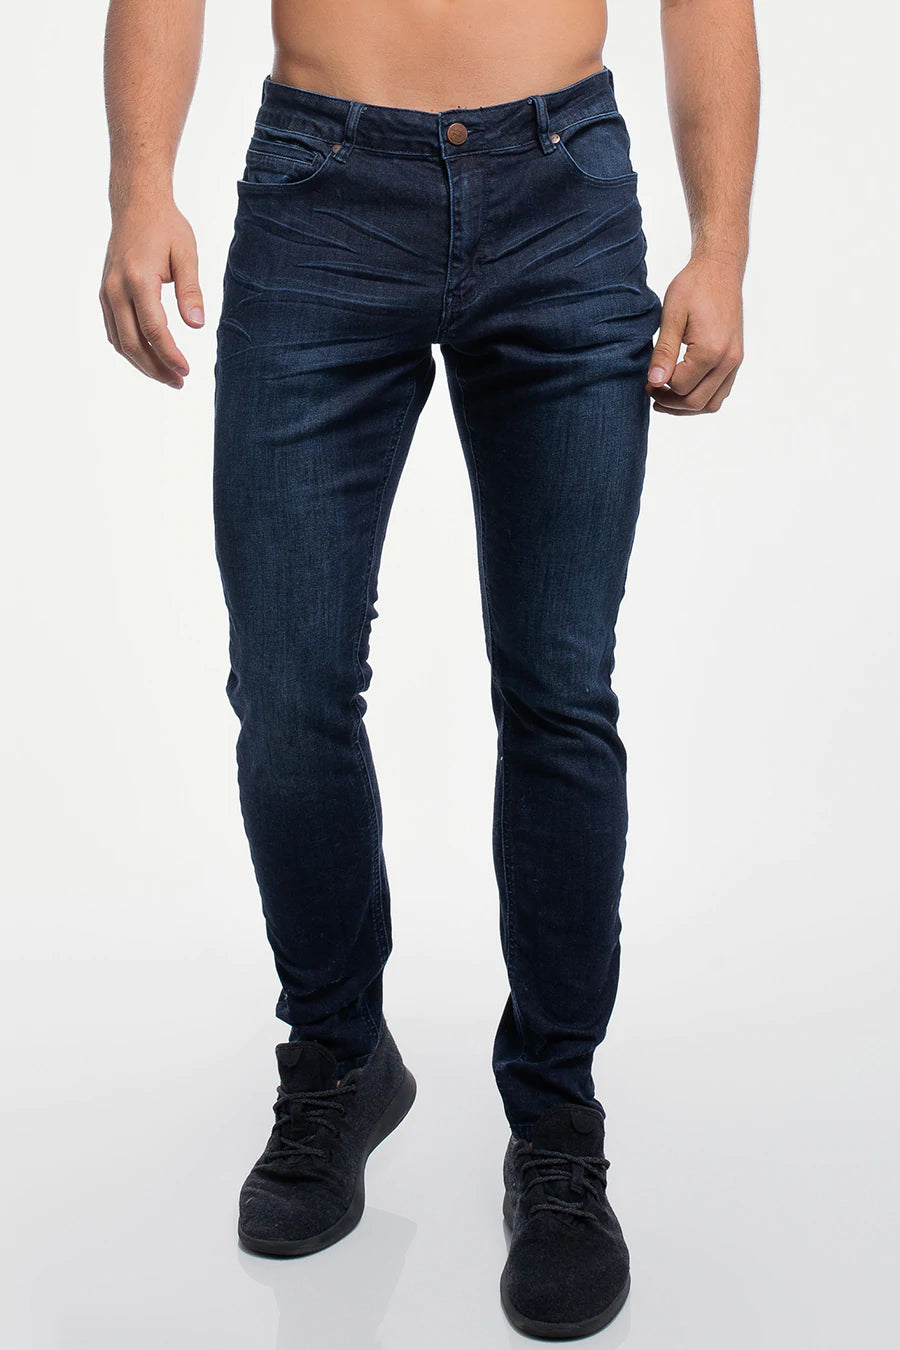 Slim Athletic Fit  - Dark Distressed - photo from front in focus #color_dark-distressed